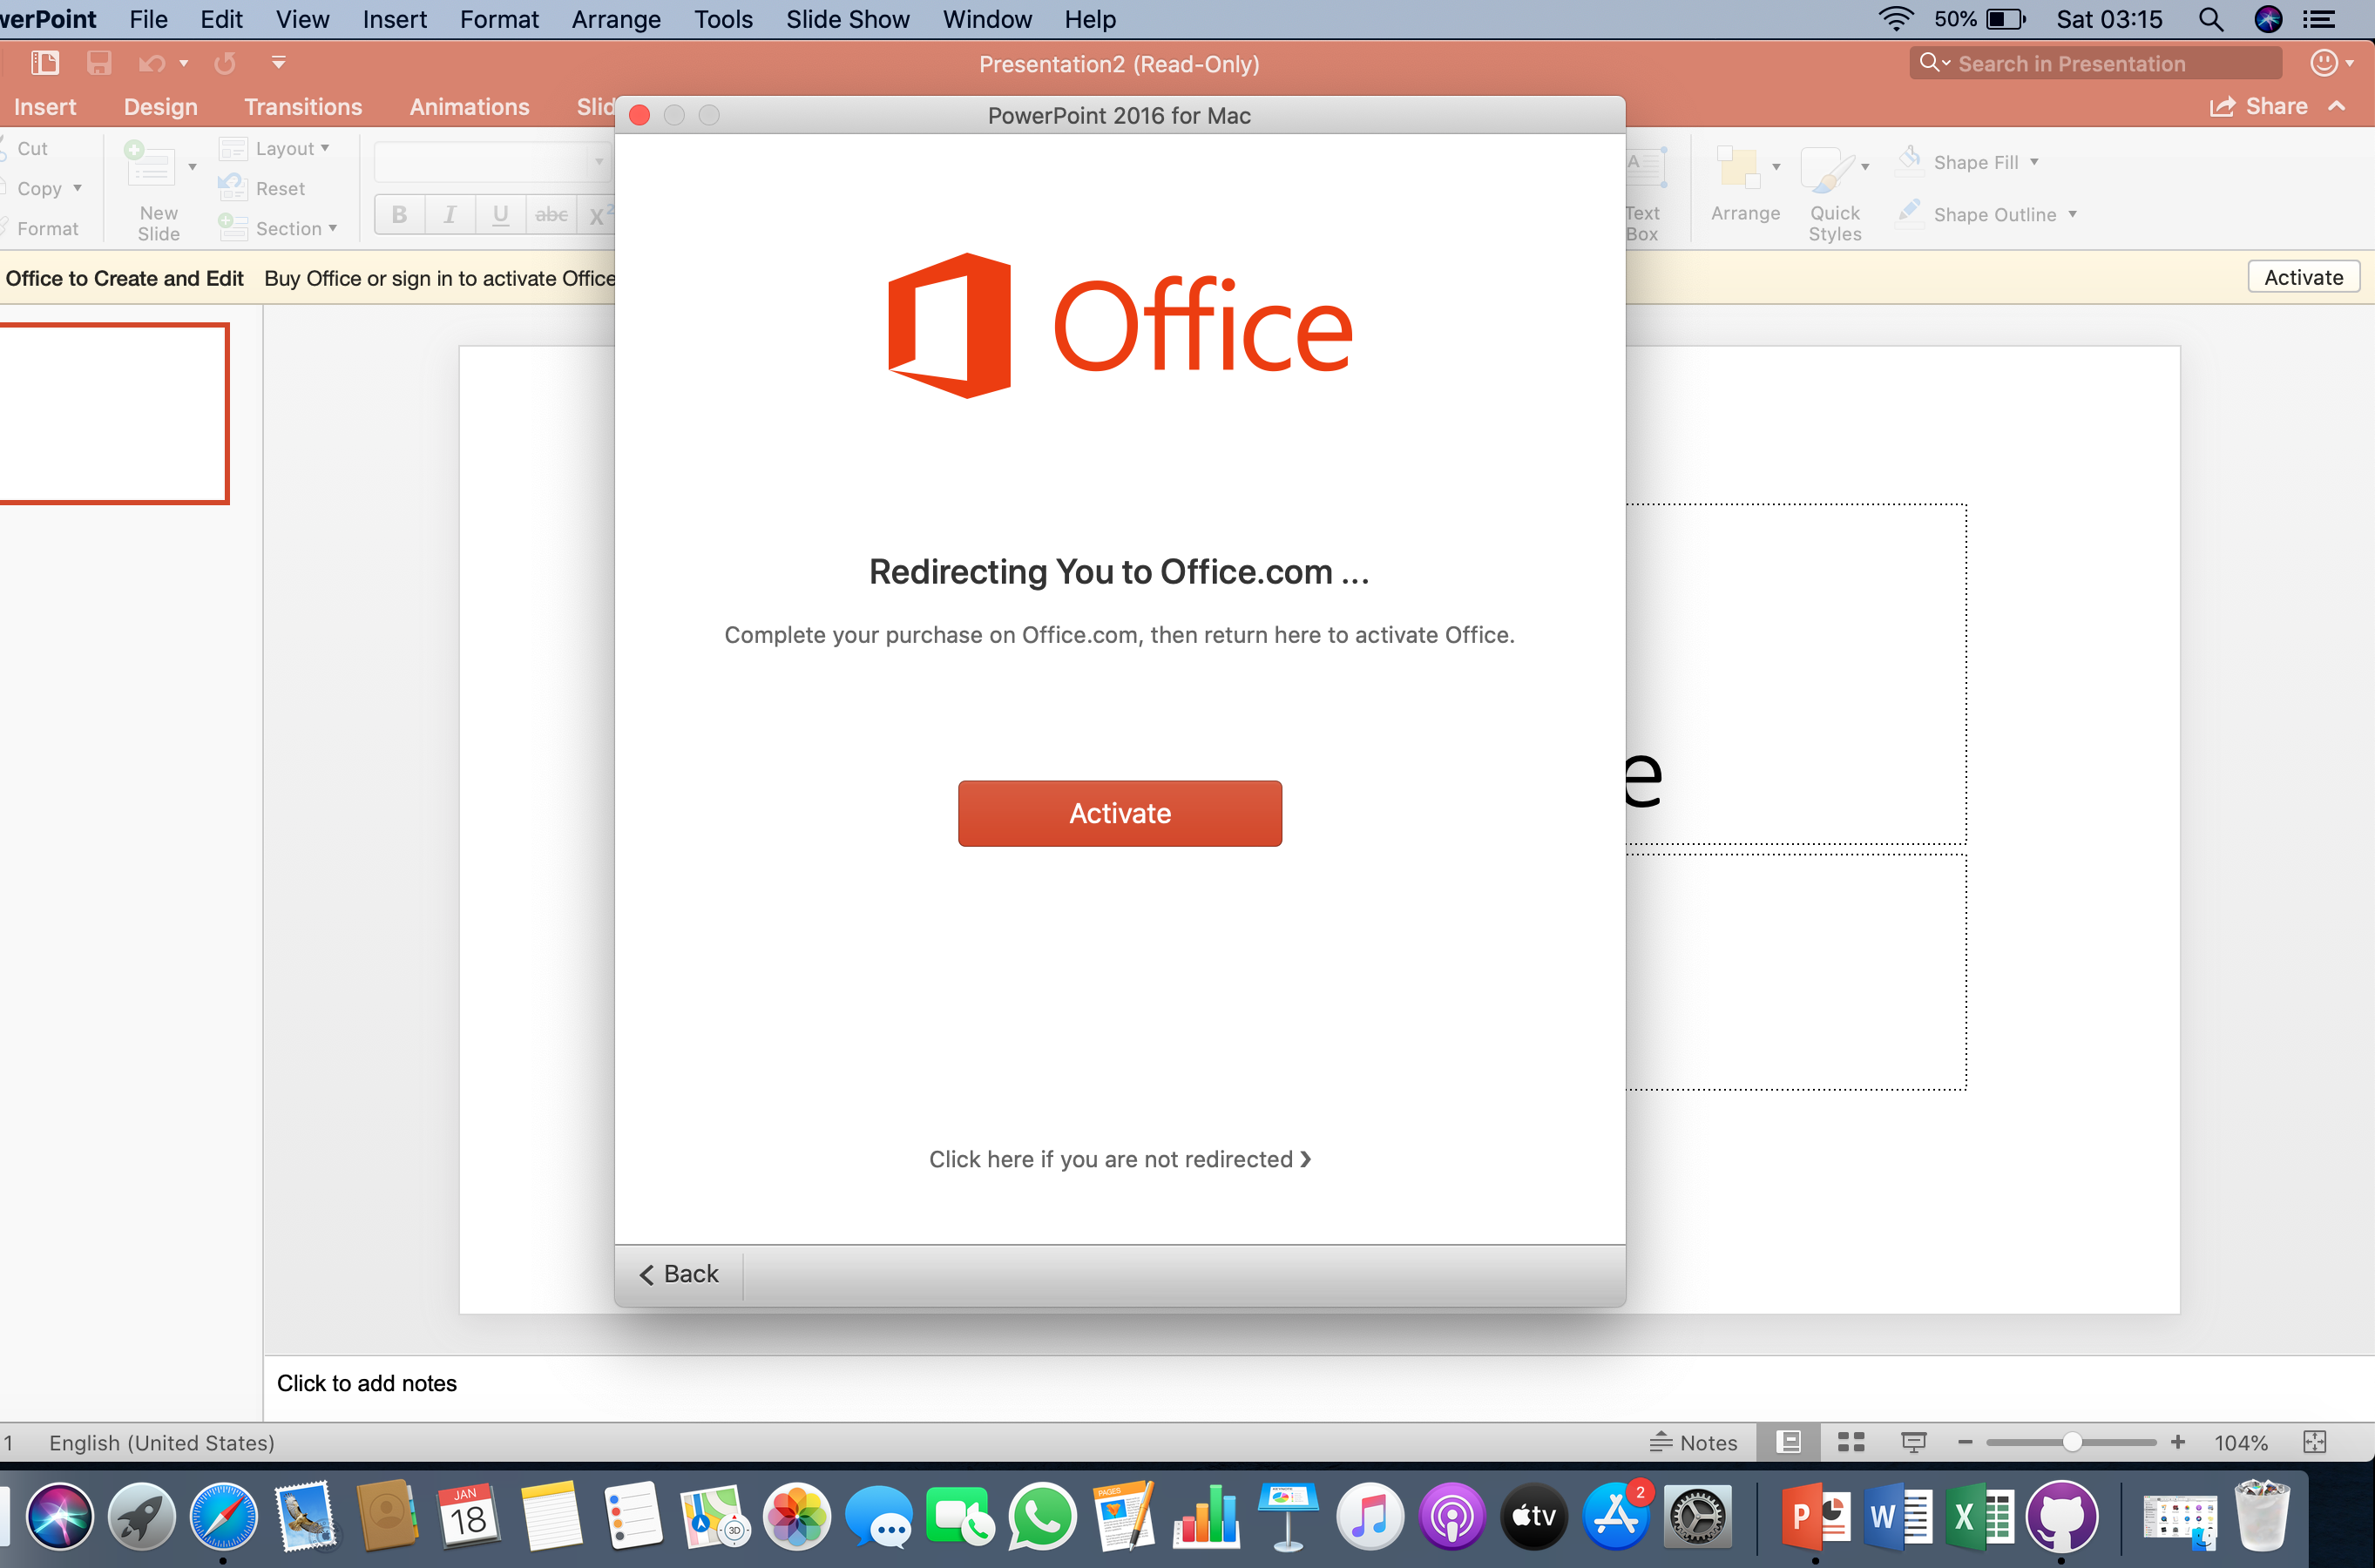 office home and business 2016 for mac kmsжњЌеЉЎе™Ё